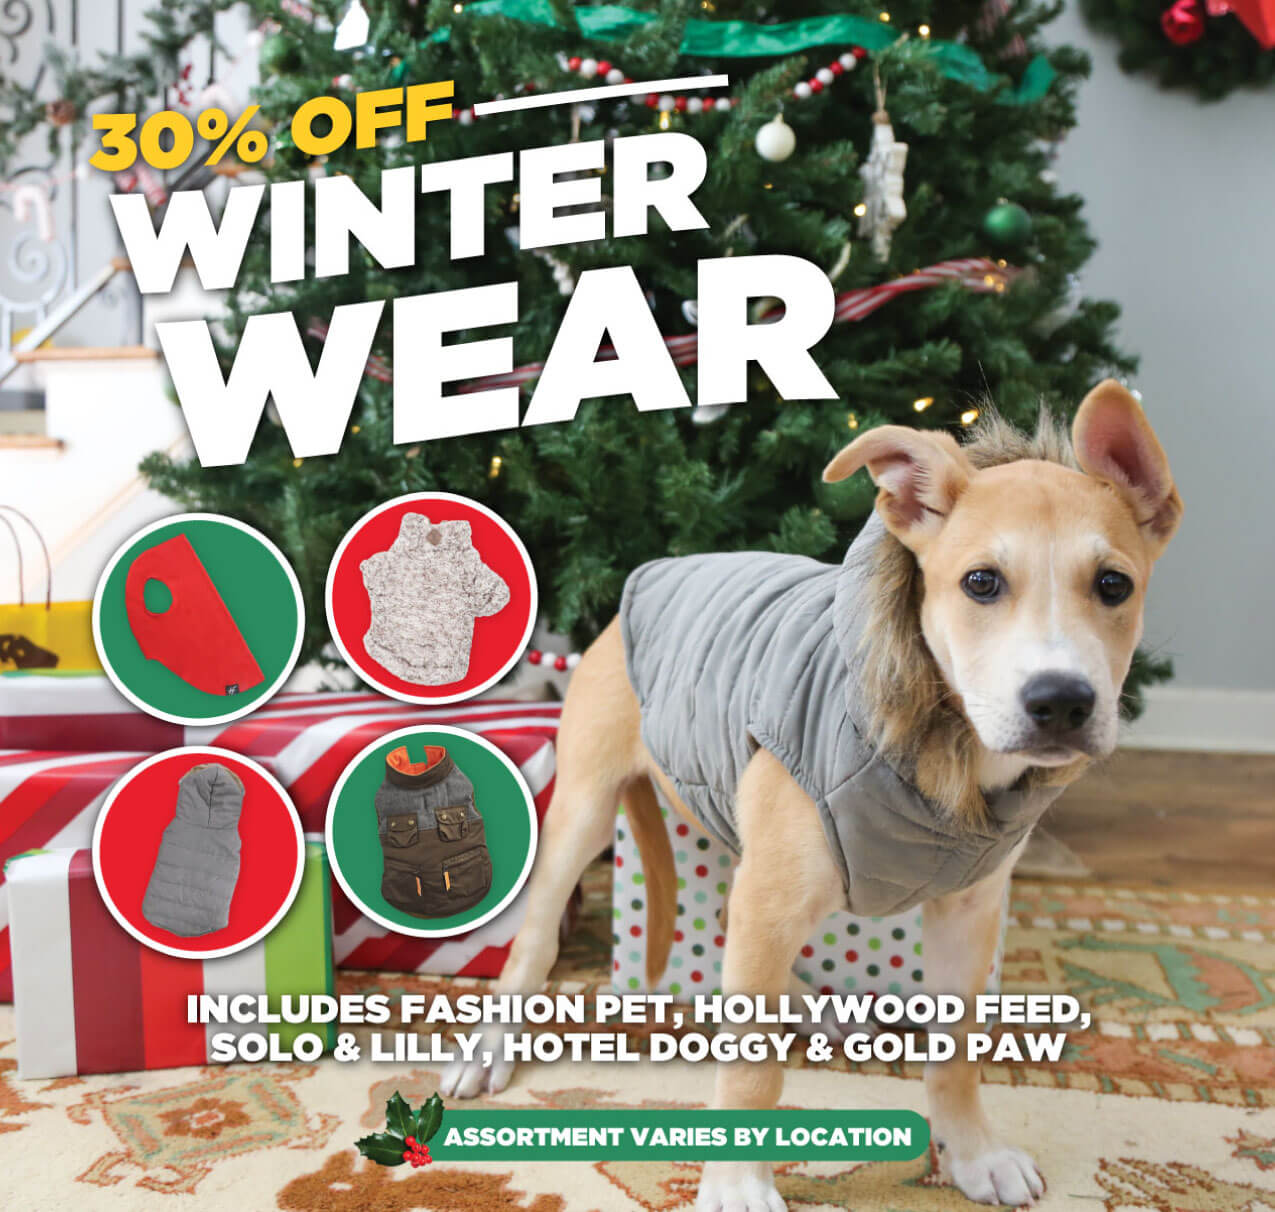 Winter Wear 30% Off (Includes Fashion Pet, Hollywood Feed, Solo & Lilly, Hotel Doggy, Thundershirts & Gold Paw)